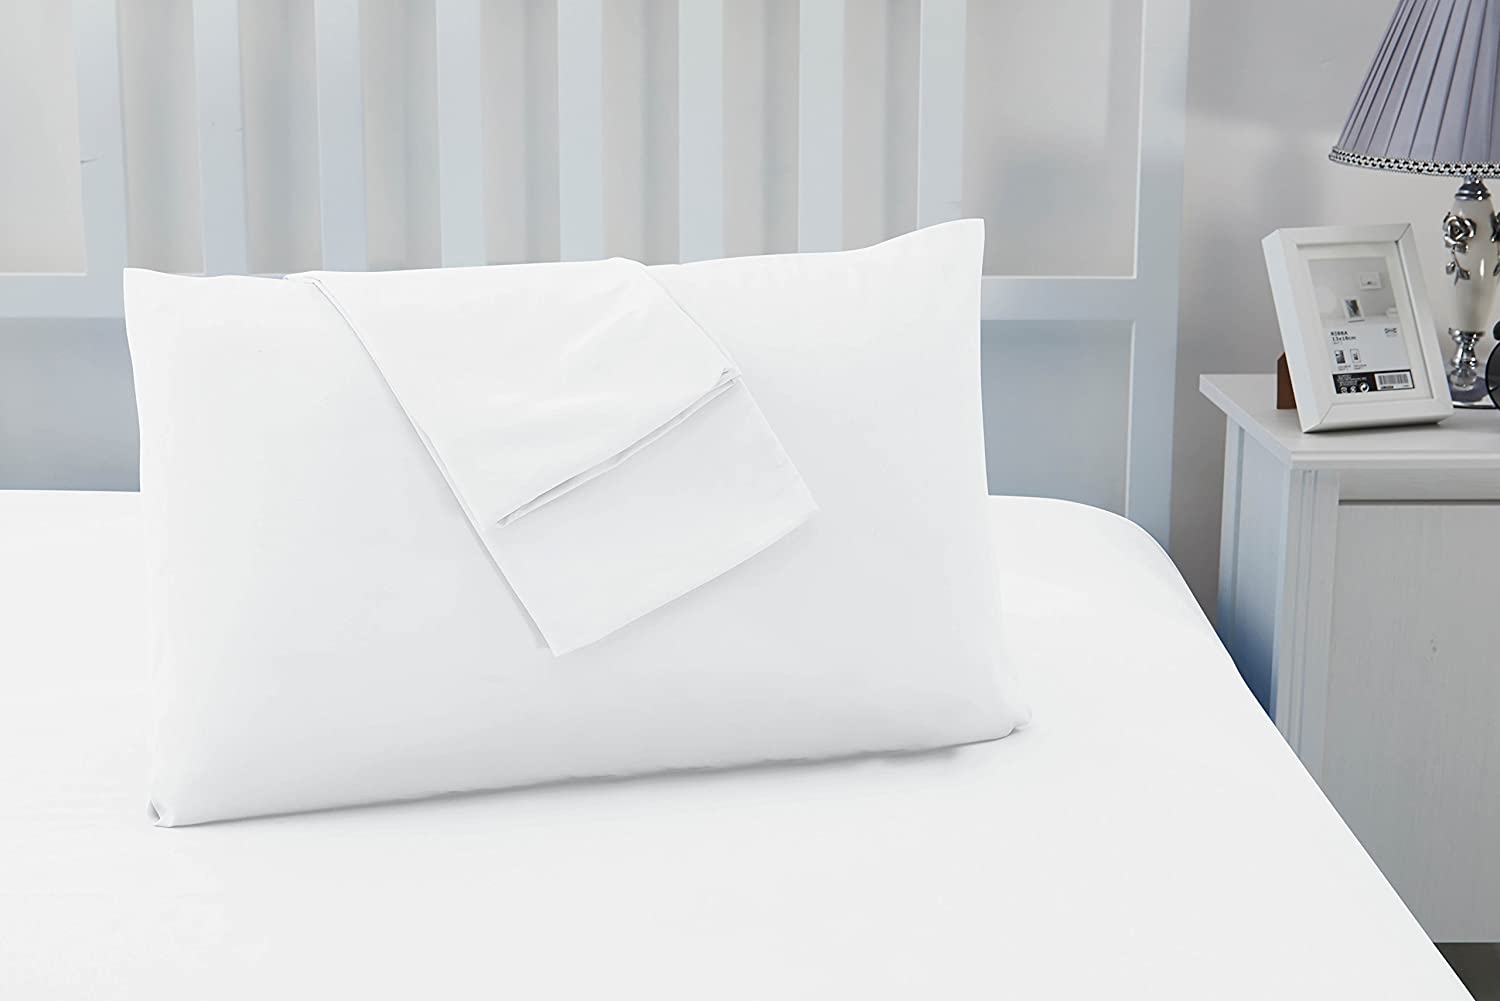 Sonia Moer White Luxury Microfibre Pillowcases RRP 5.99 CLEARANCE XL 4.99